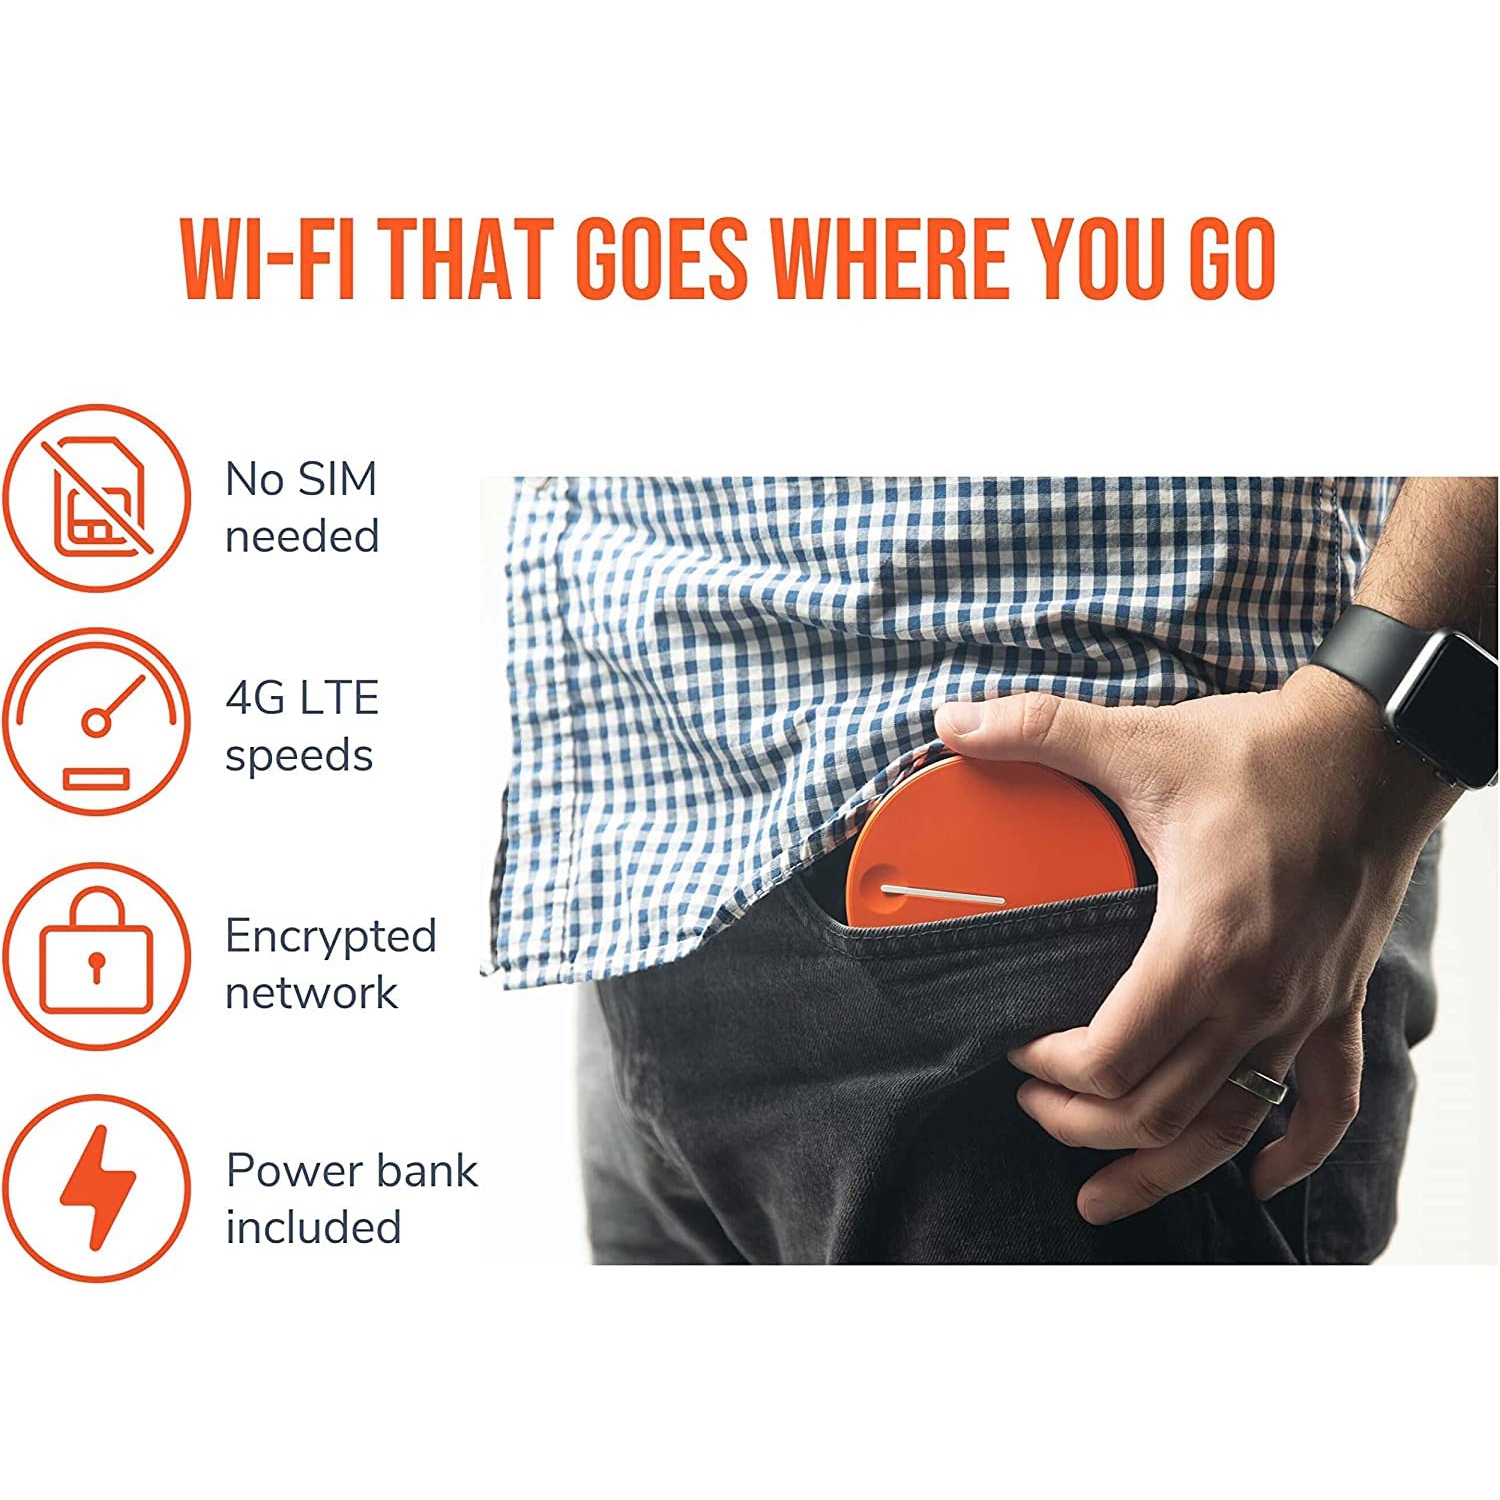 Skyroam Solis Lite: International Mobile WiFi Hotspot | Global SIM-Free 4G LTE | Coverage in 130+ Countries | Get Data by The Day, Month, or GB